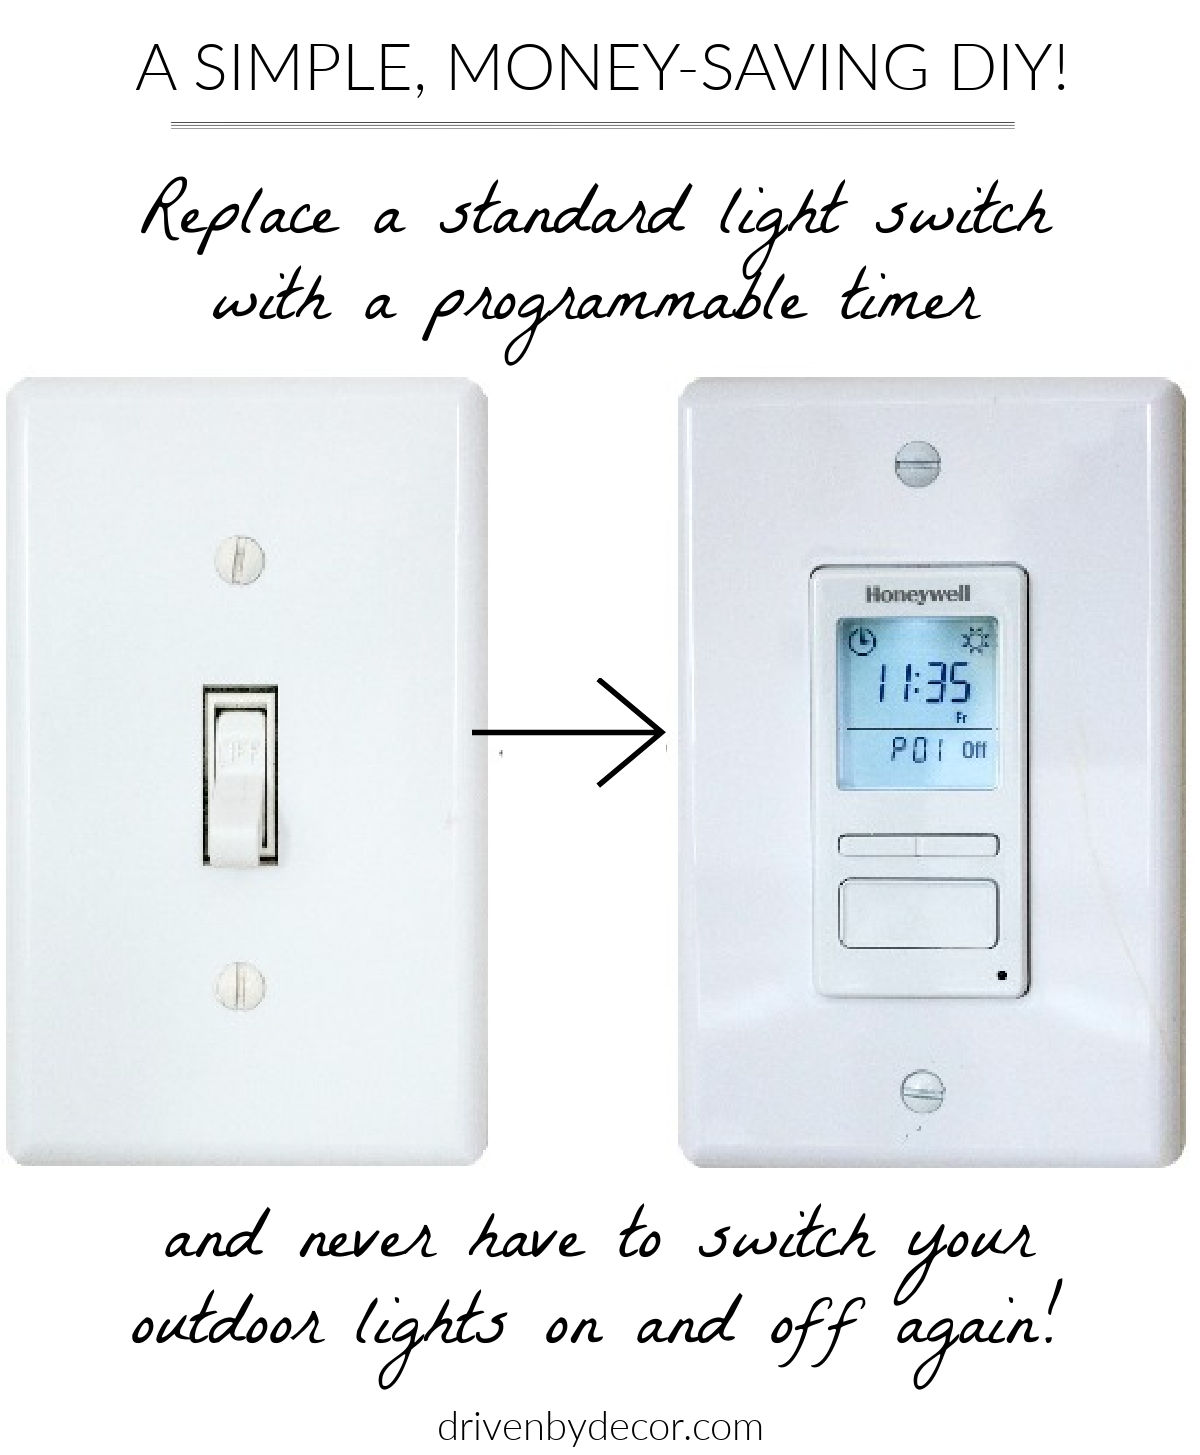 My favorite outdoor light timer - it's a must-have!